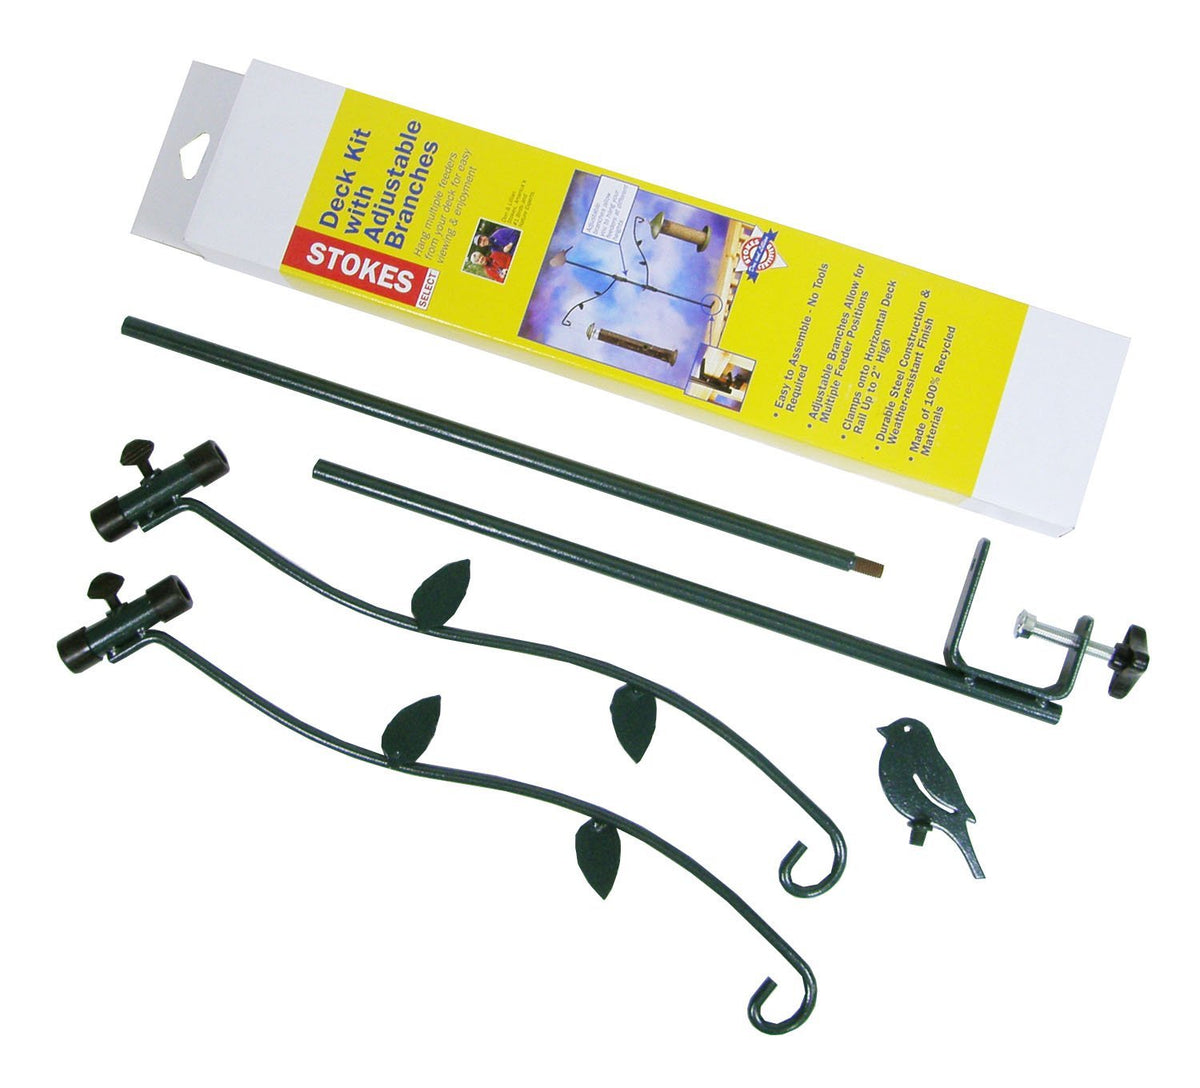 Stokes Select 38099 Deck Kit With Adjustable Branches